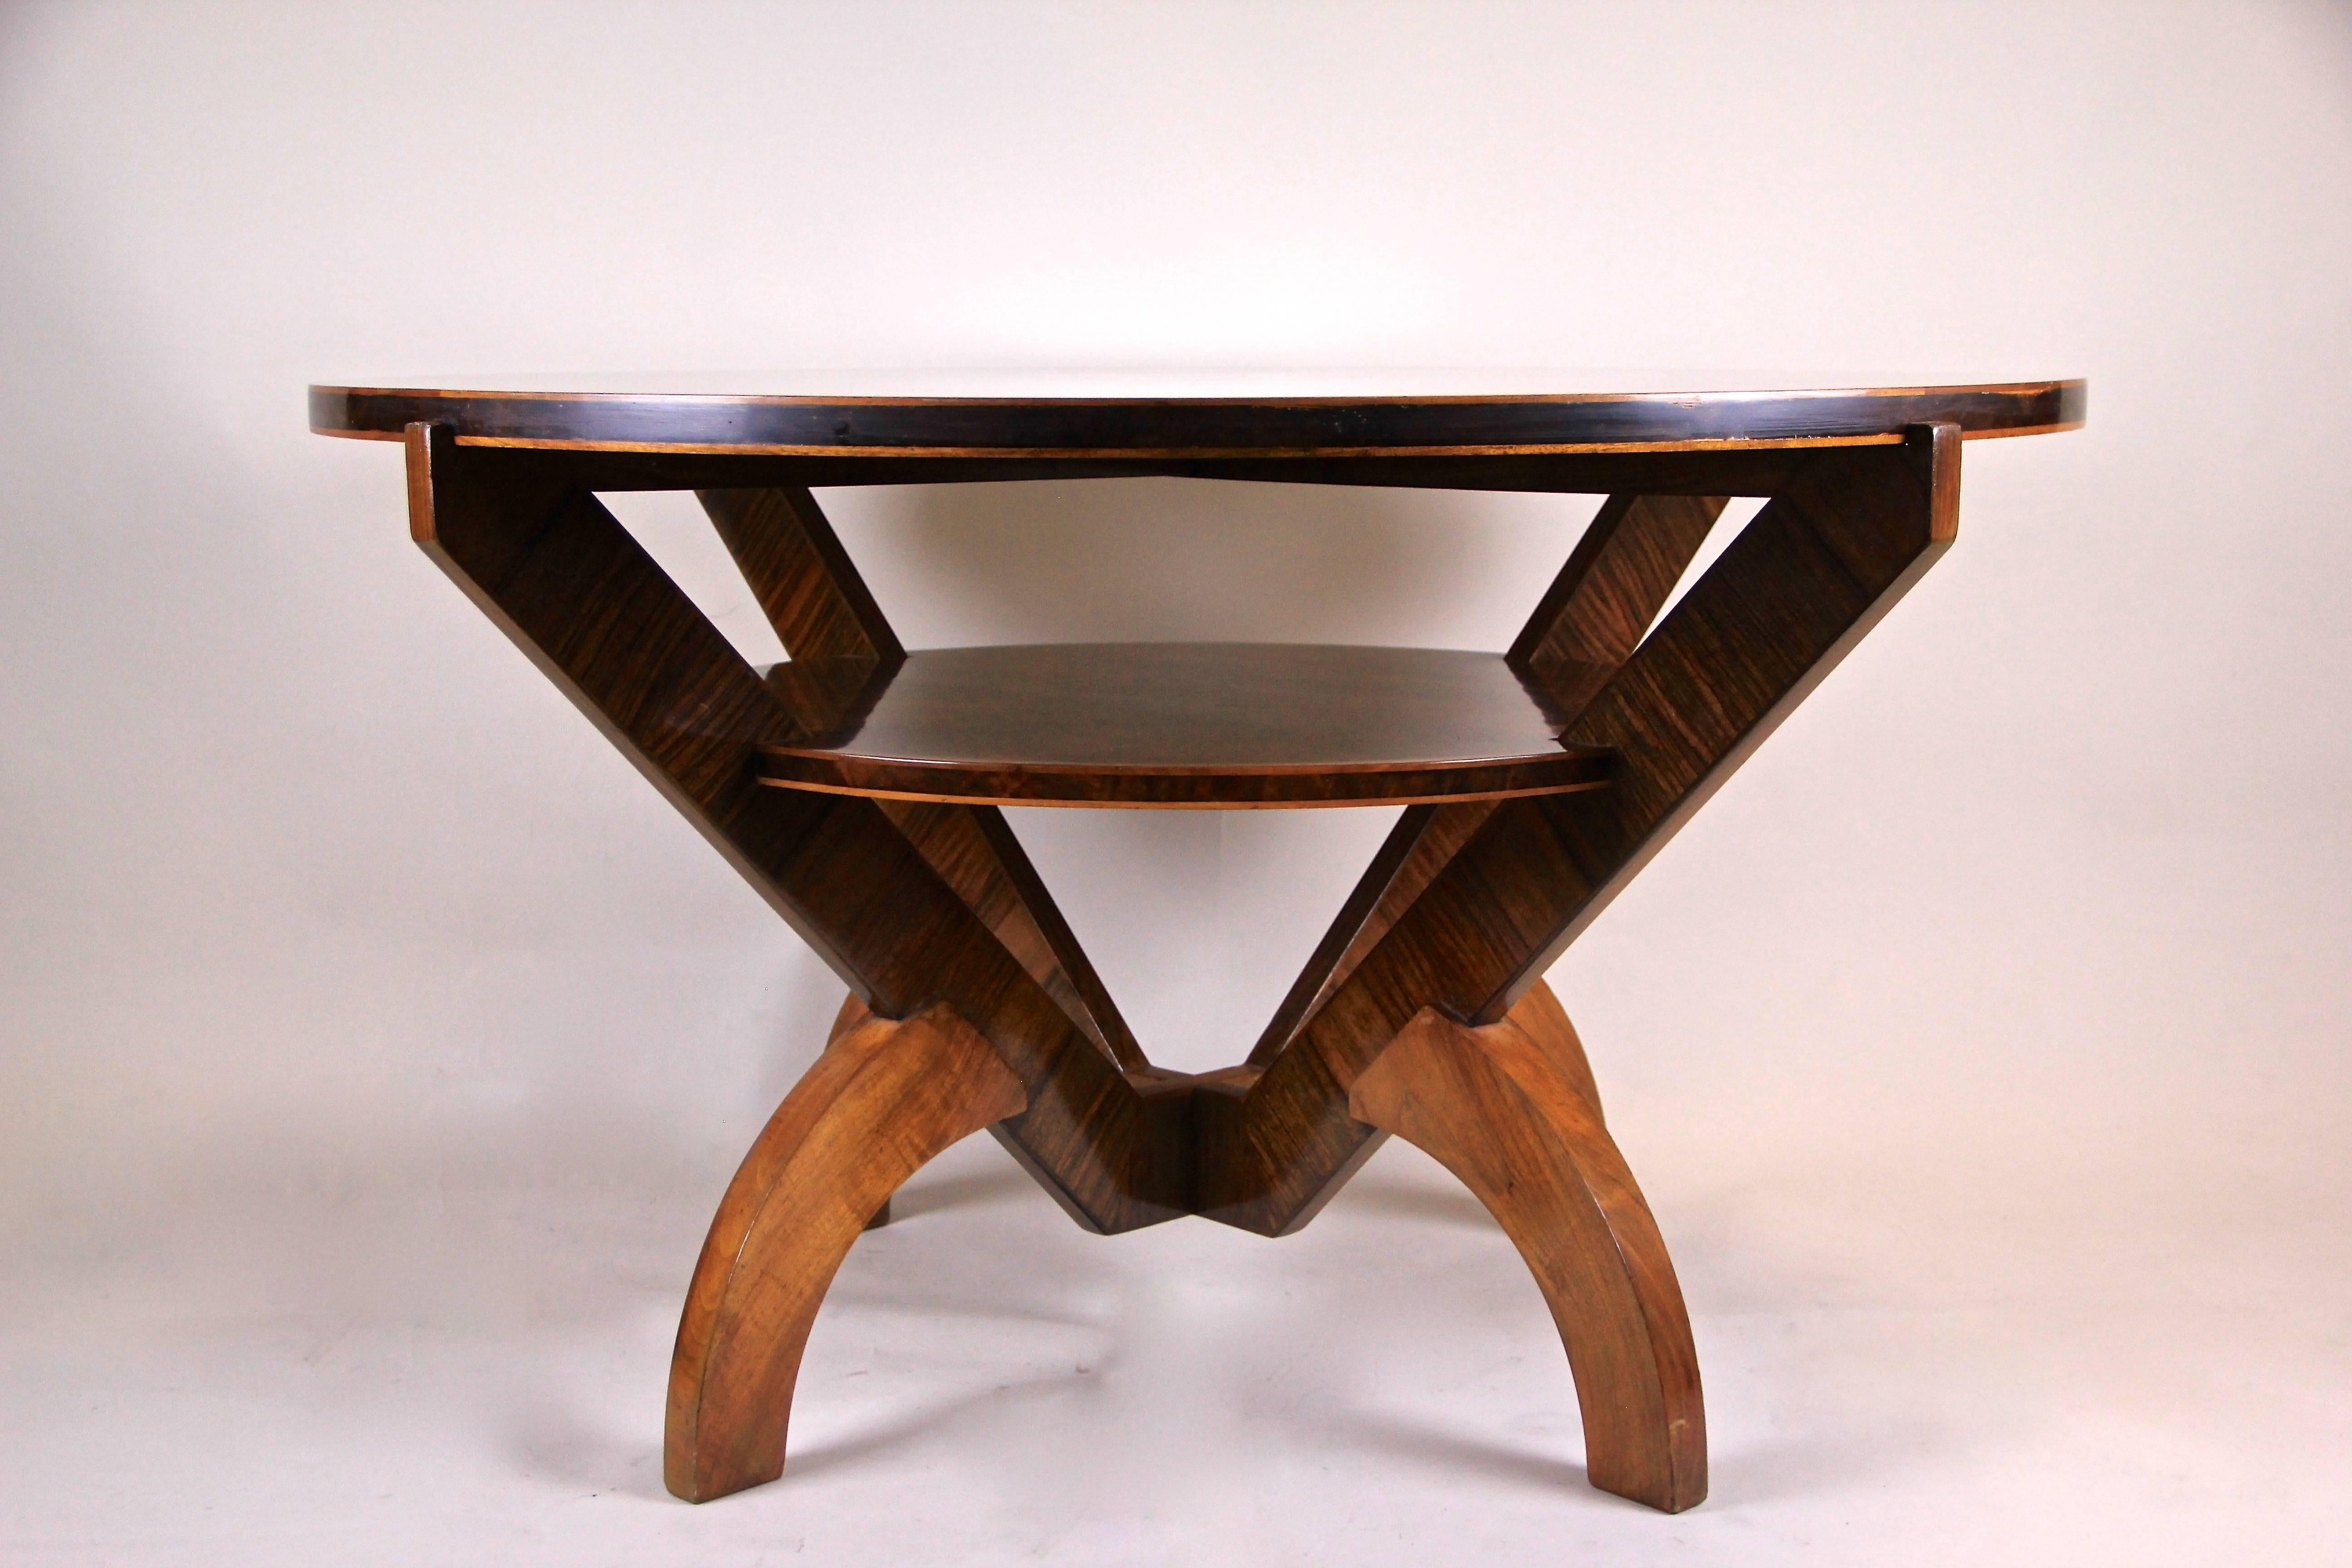 Macassar Art Deco Table with Marquetry Work by A. Herrgesell, Austria, circa 1925